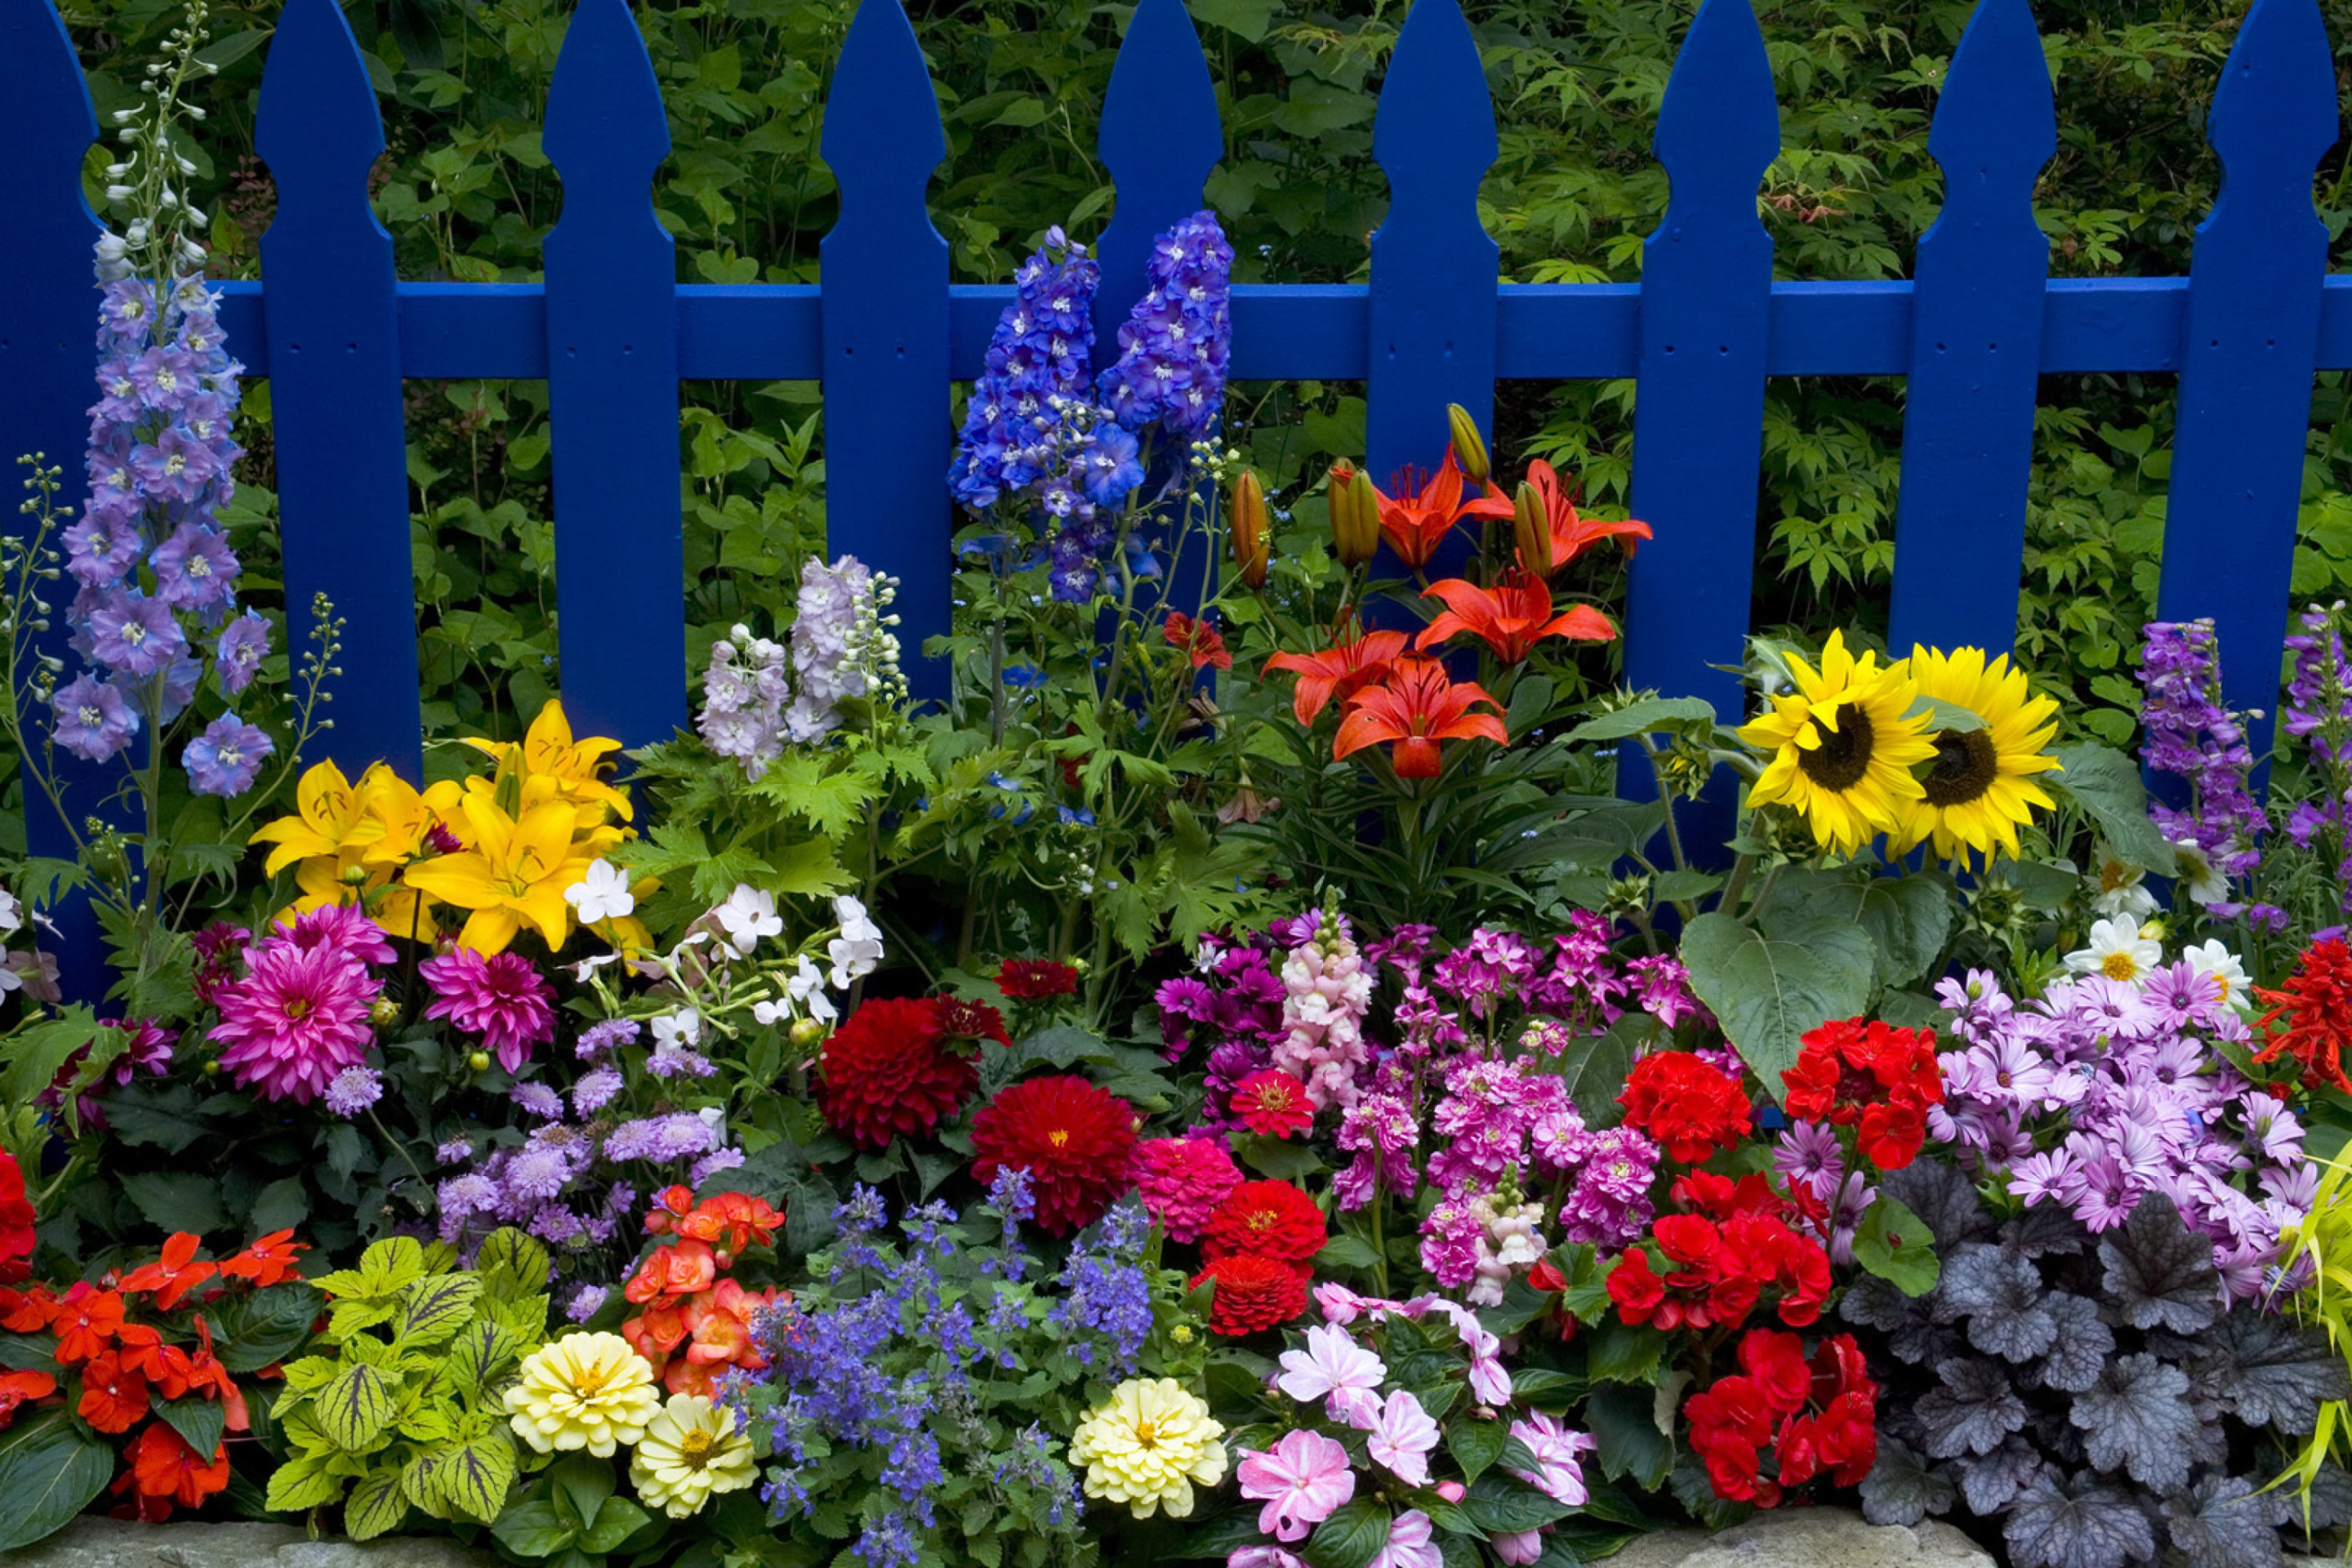 Garden Flowers In Front Of Bright Blue Fence screenshot #1 2880x1920